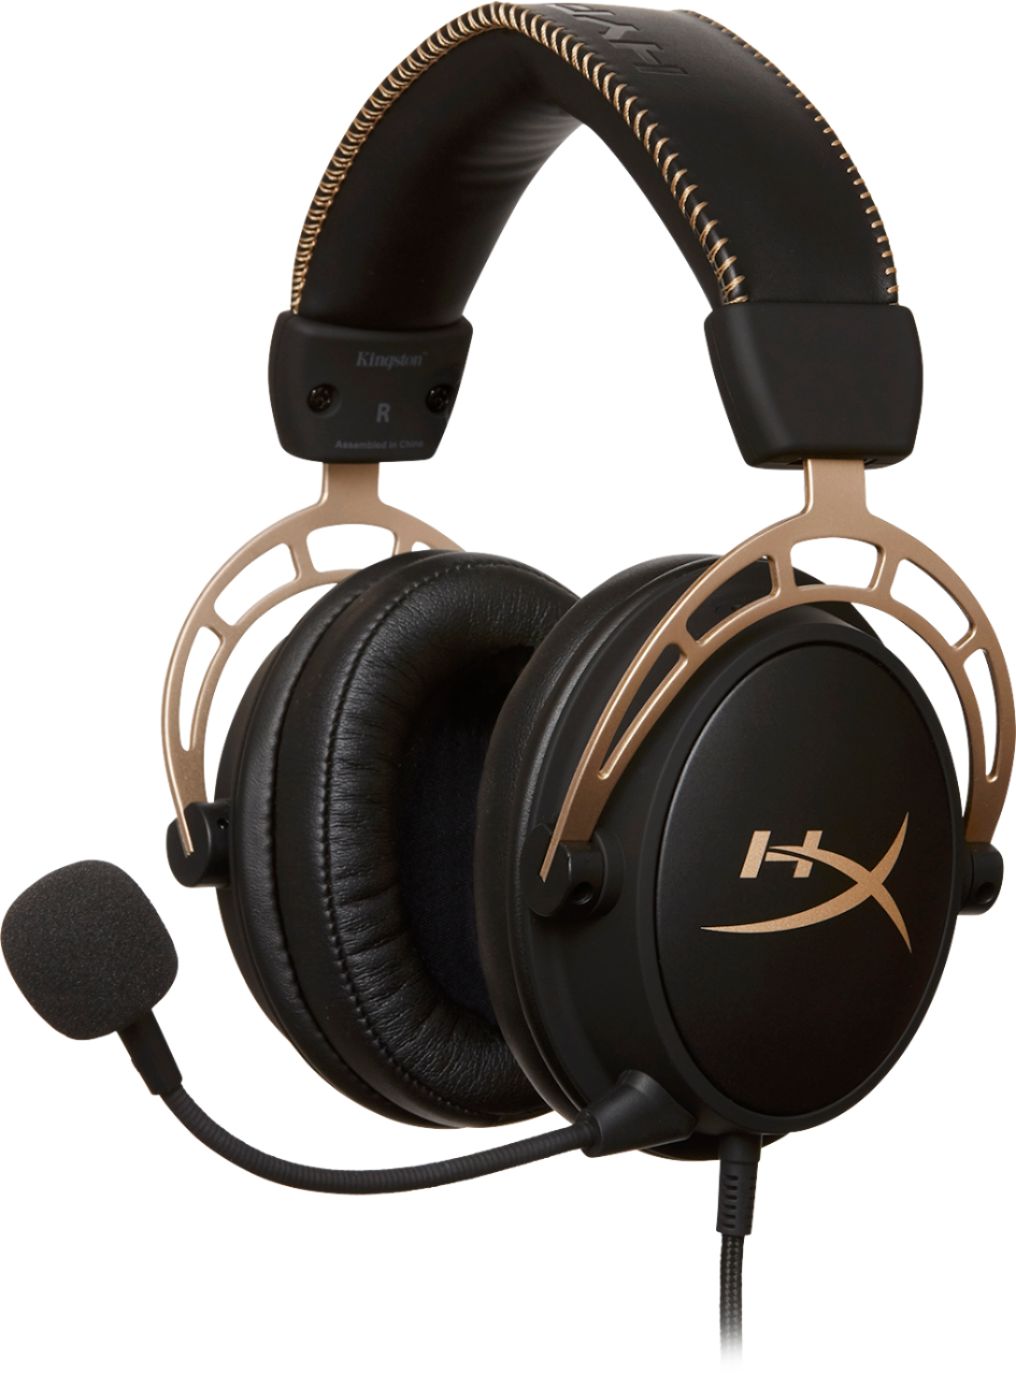 can you use ps4 gold headset on xbox one